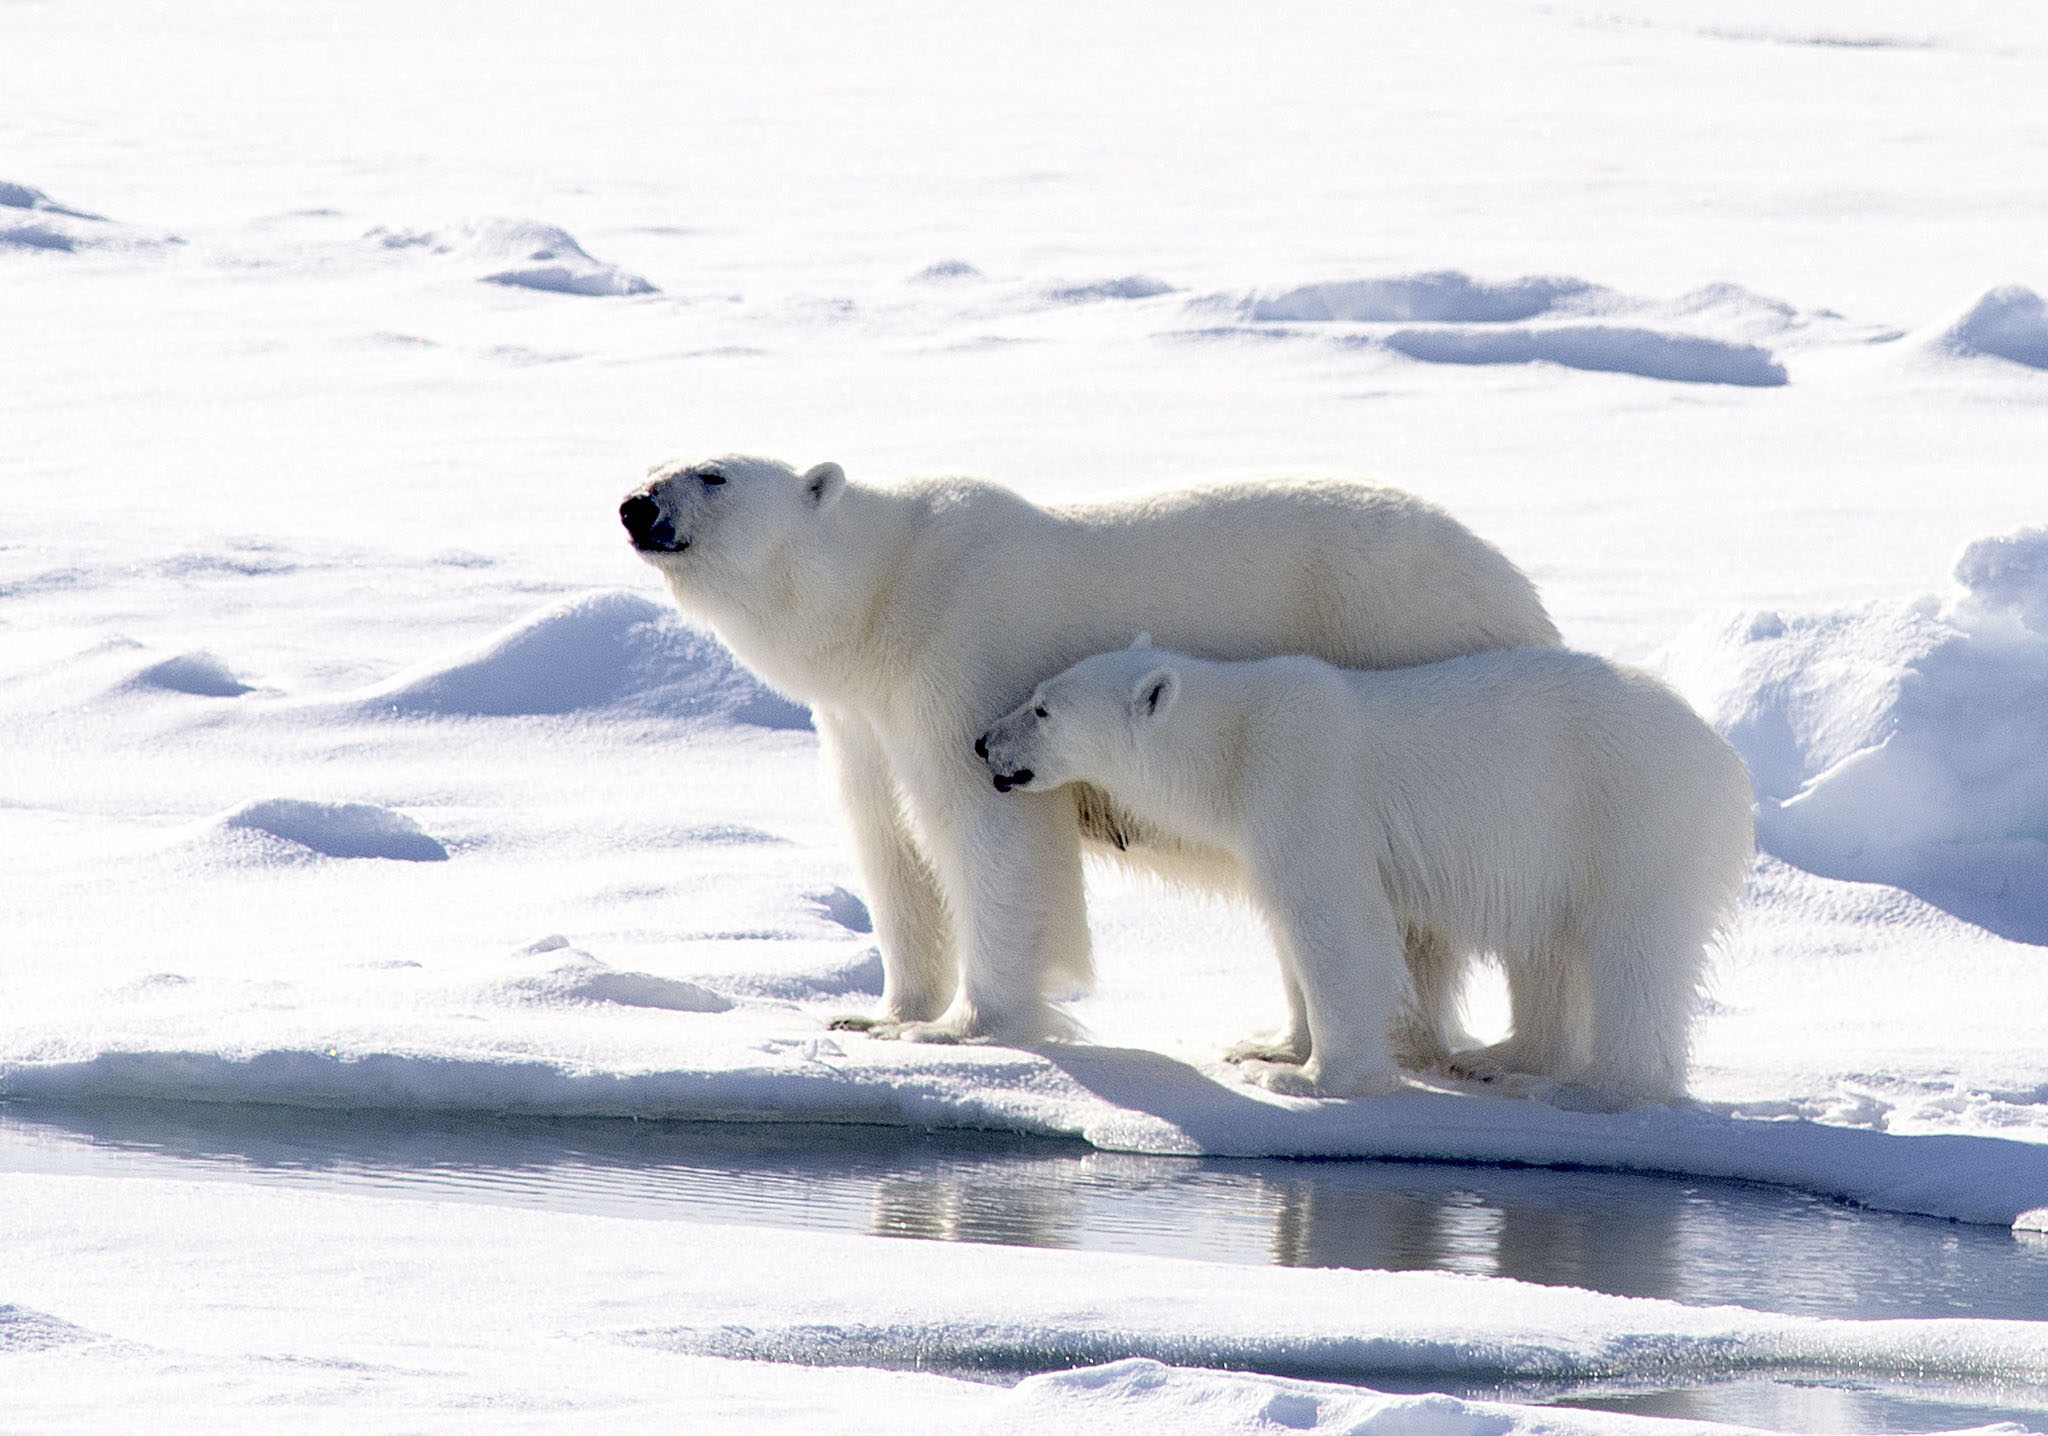 An adult and juvenile polar bear stand on a sheet of ice at the edge of water.